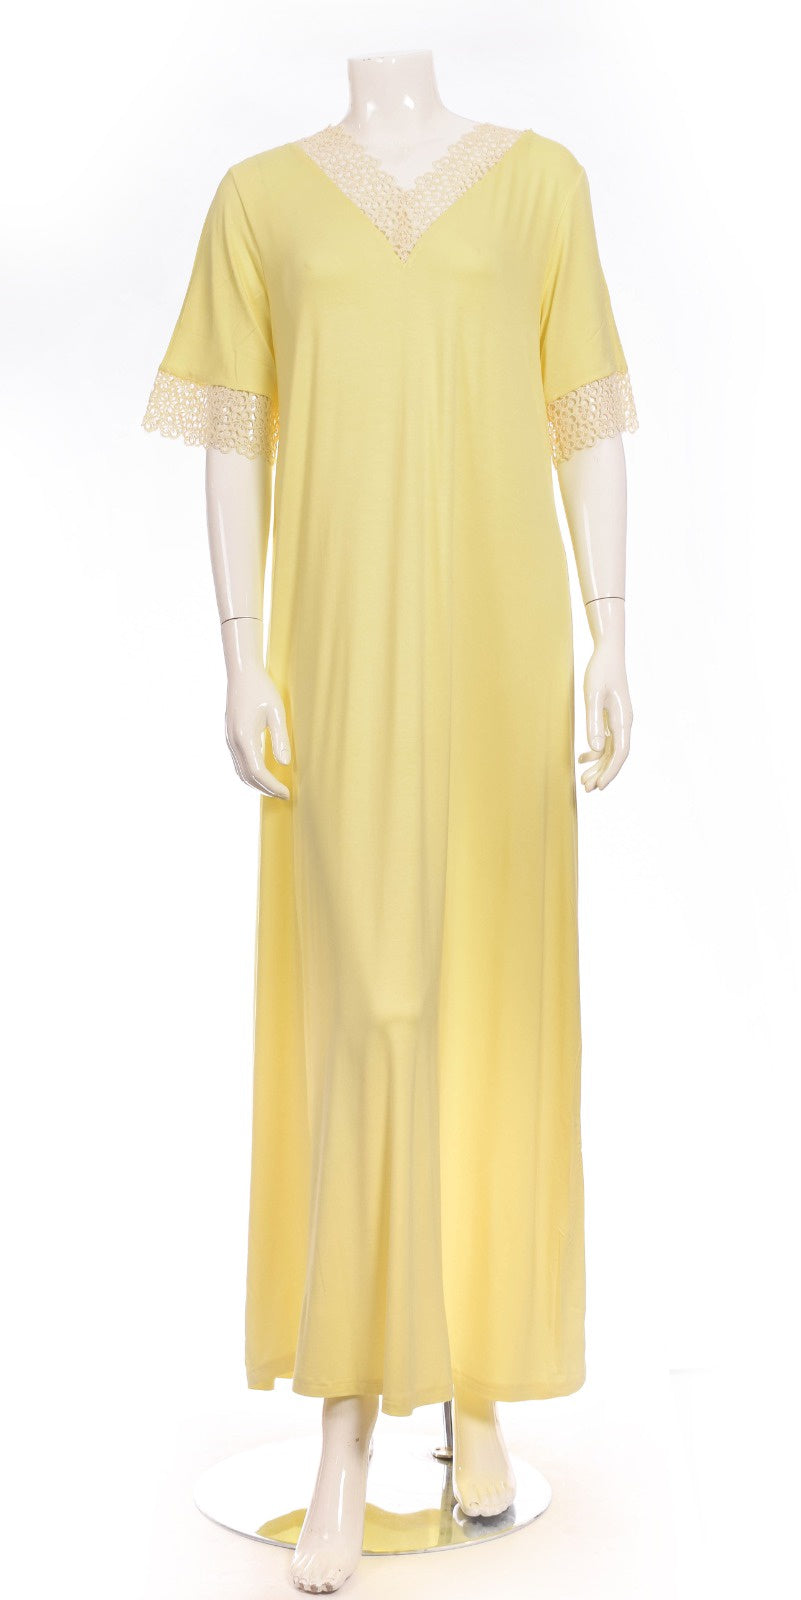 Yellow Garment with Lace Dress Coco Box 